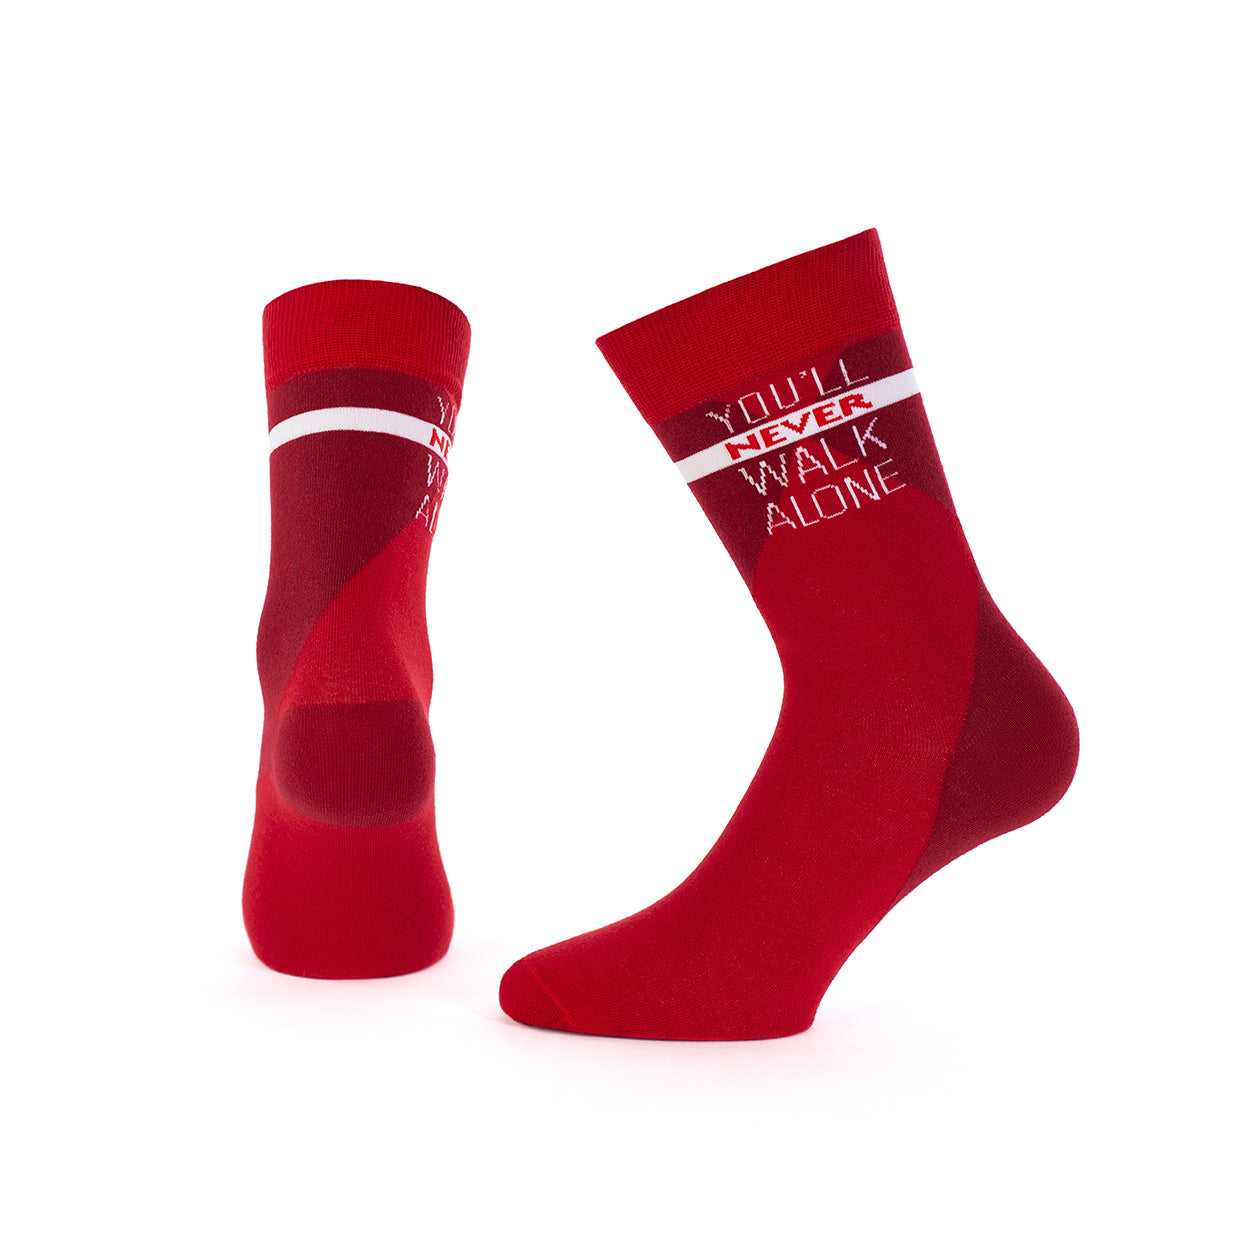 You'll Never Walk Alone Football Sock Digital Image Front and Back Casual